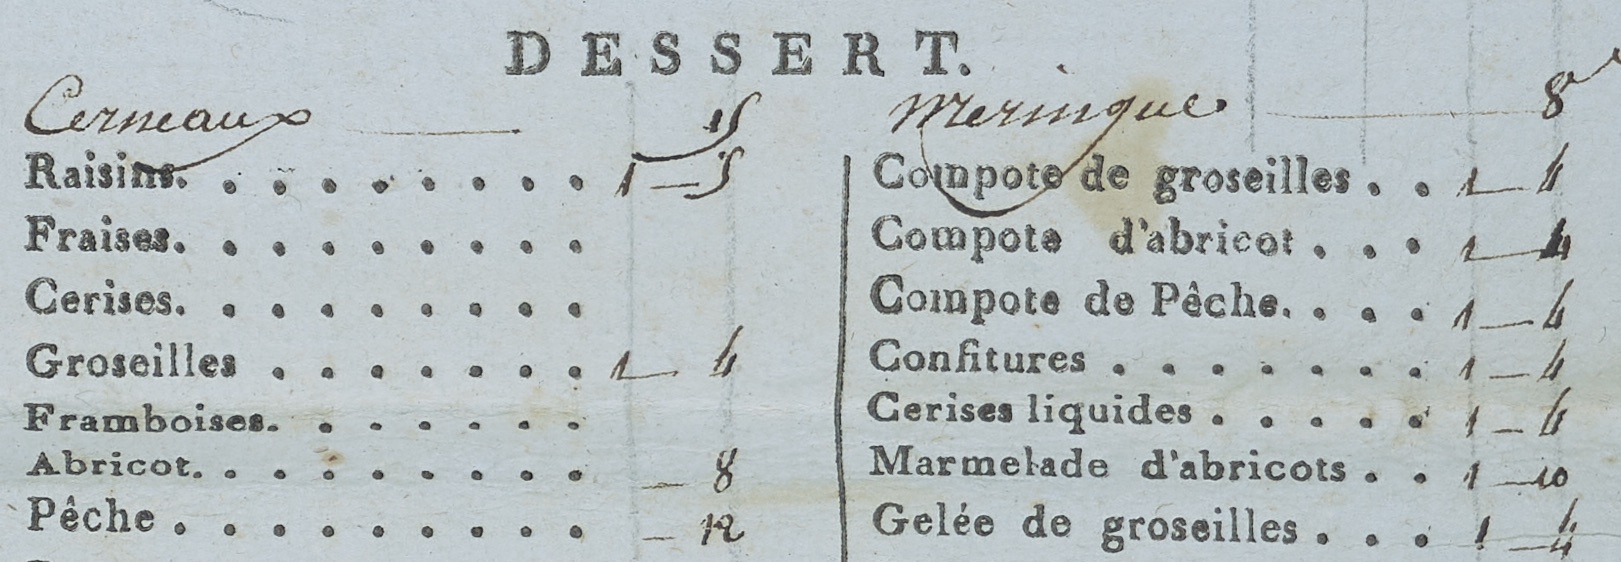 Detail from 1802 menu showing desserts